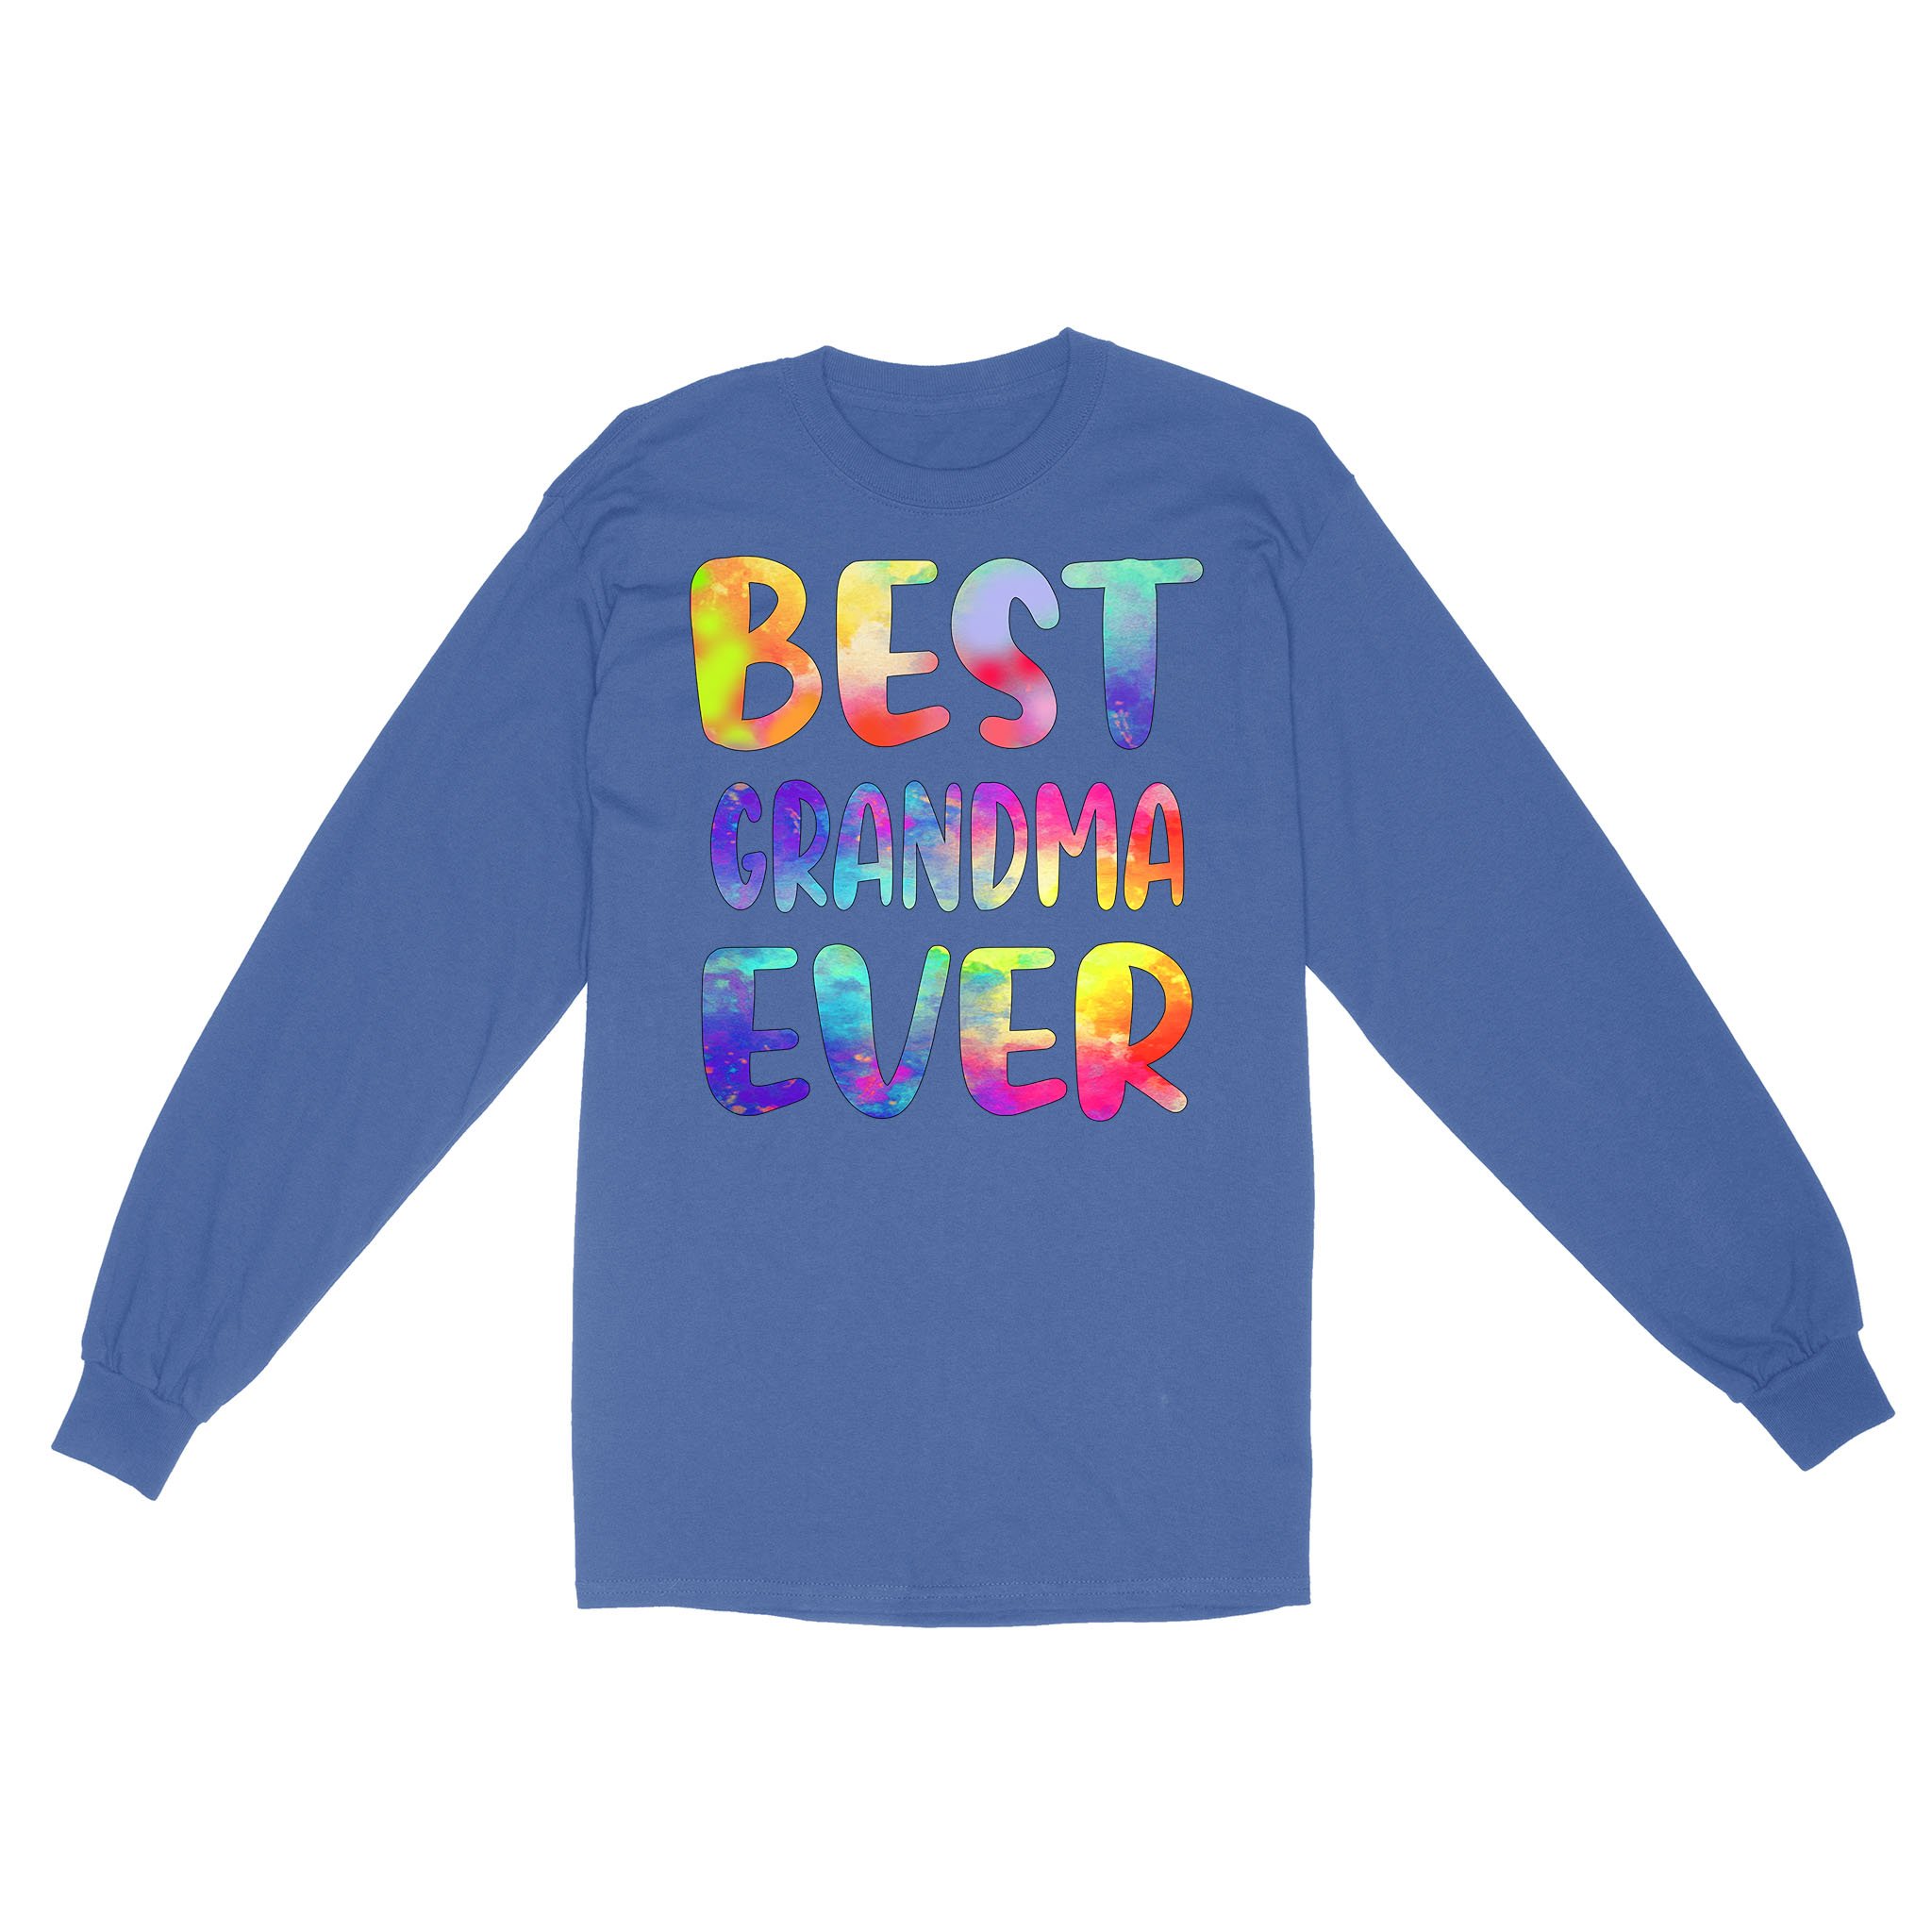 Best Grandma Ever Colorful Funny Mother’s Day Shirt – Standard Long Sleeve